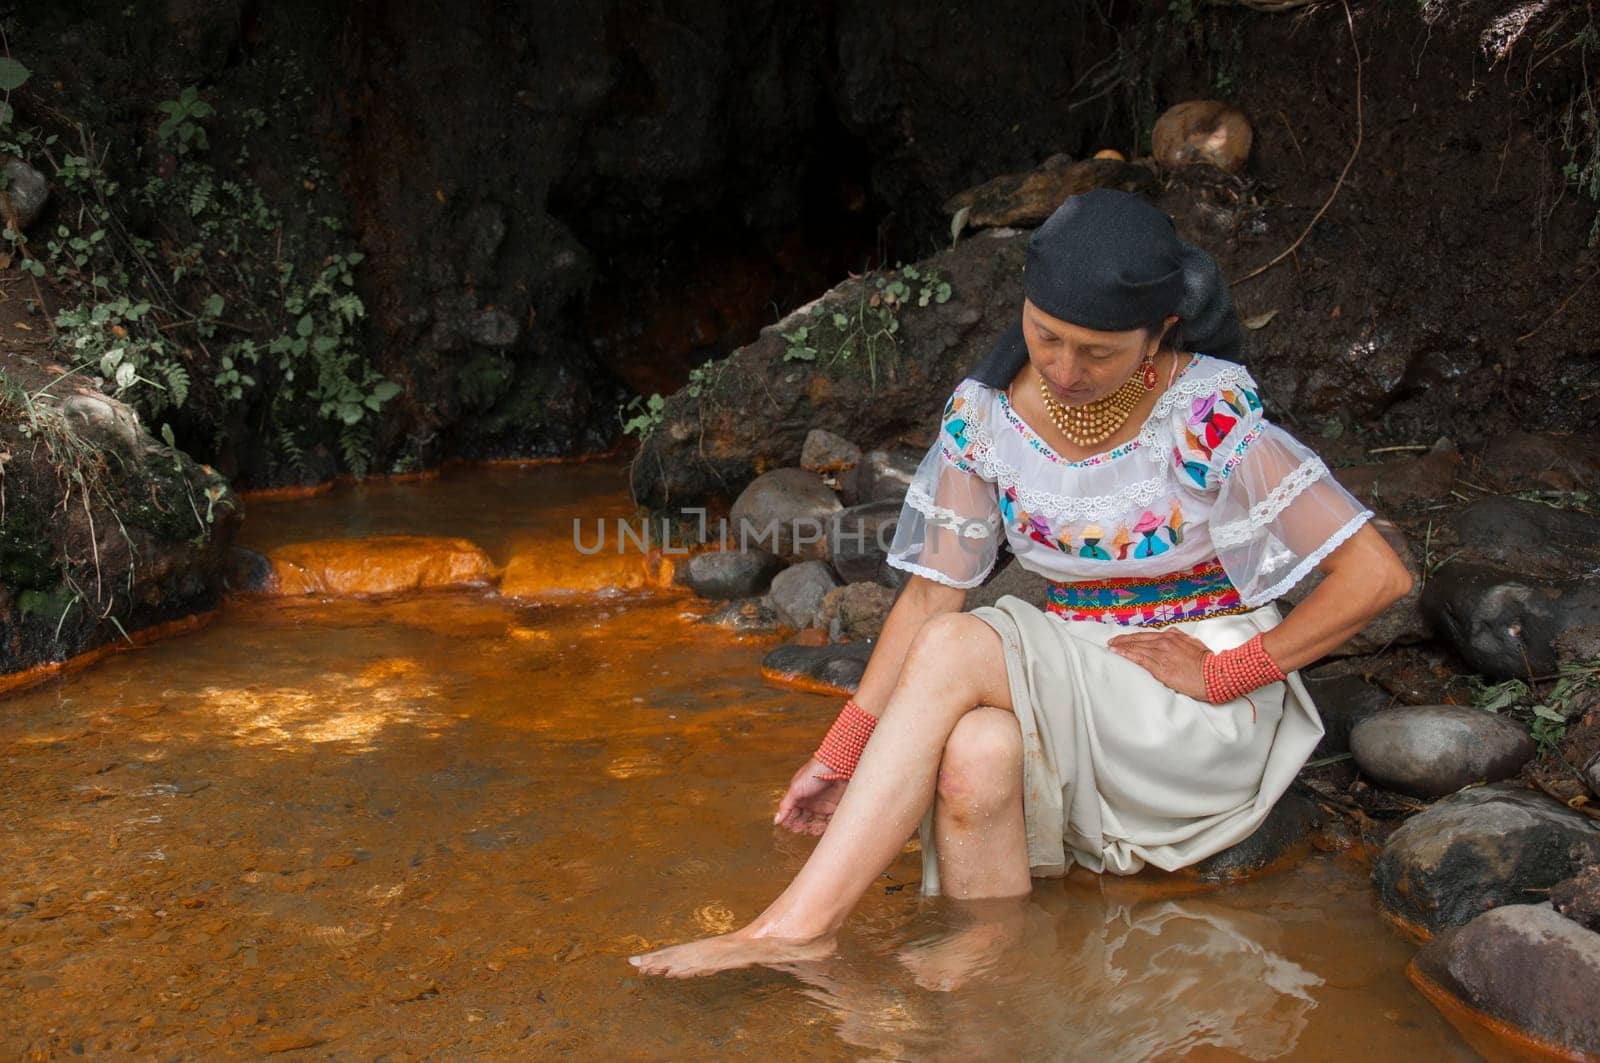 shaman woman in a sacred ritual in a place of meditation and harmony inside a lagoon. High quality photo